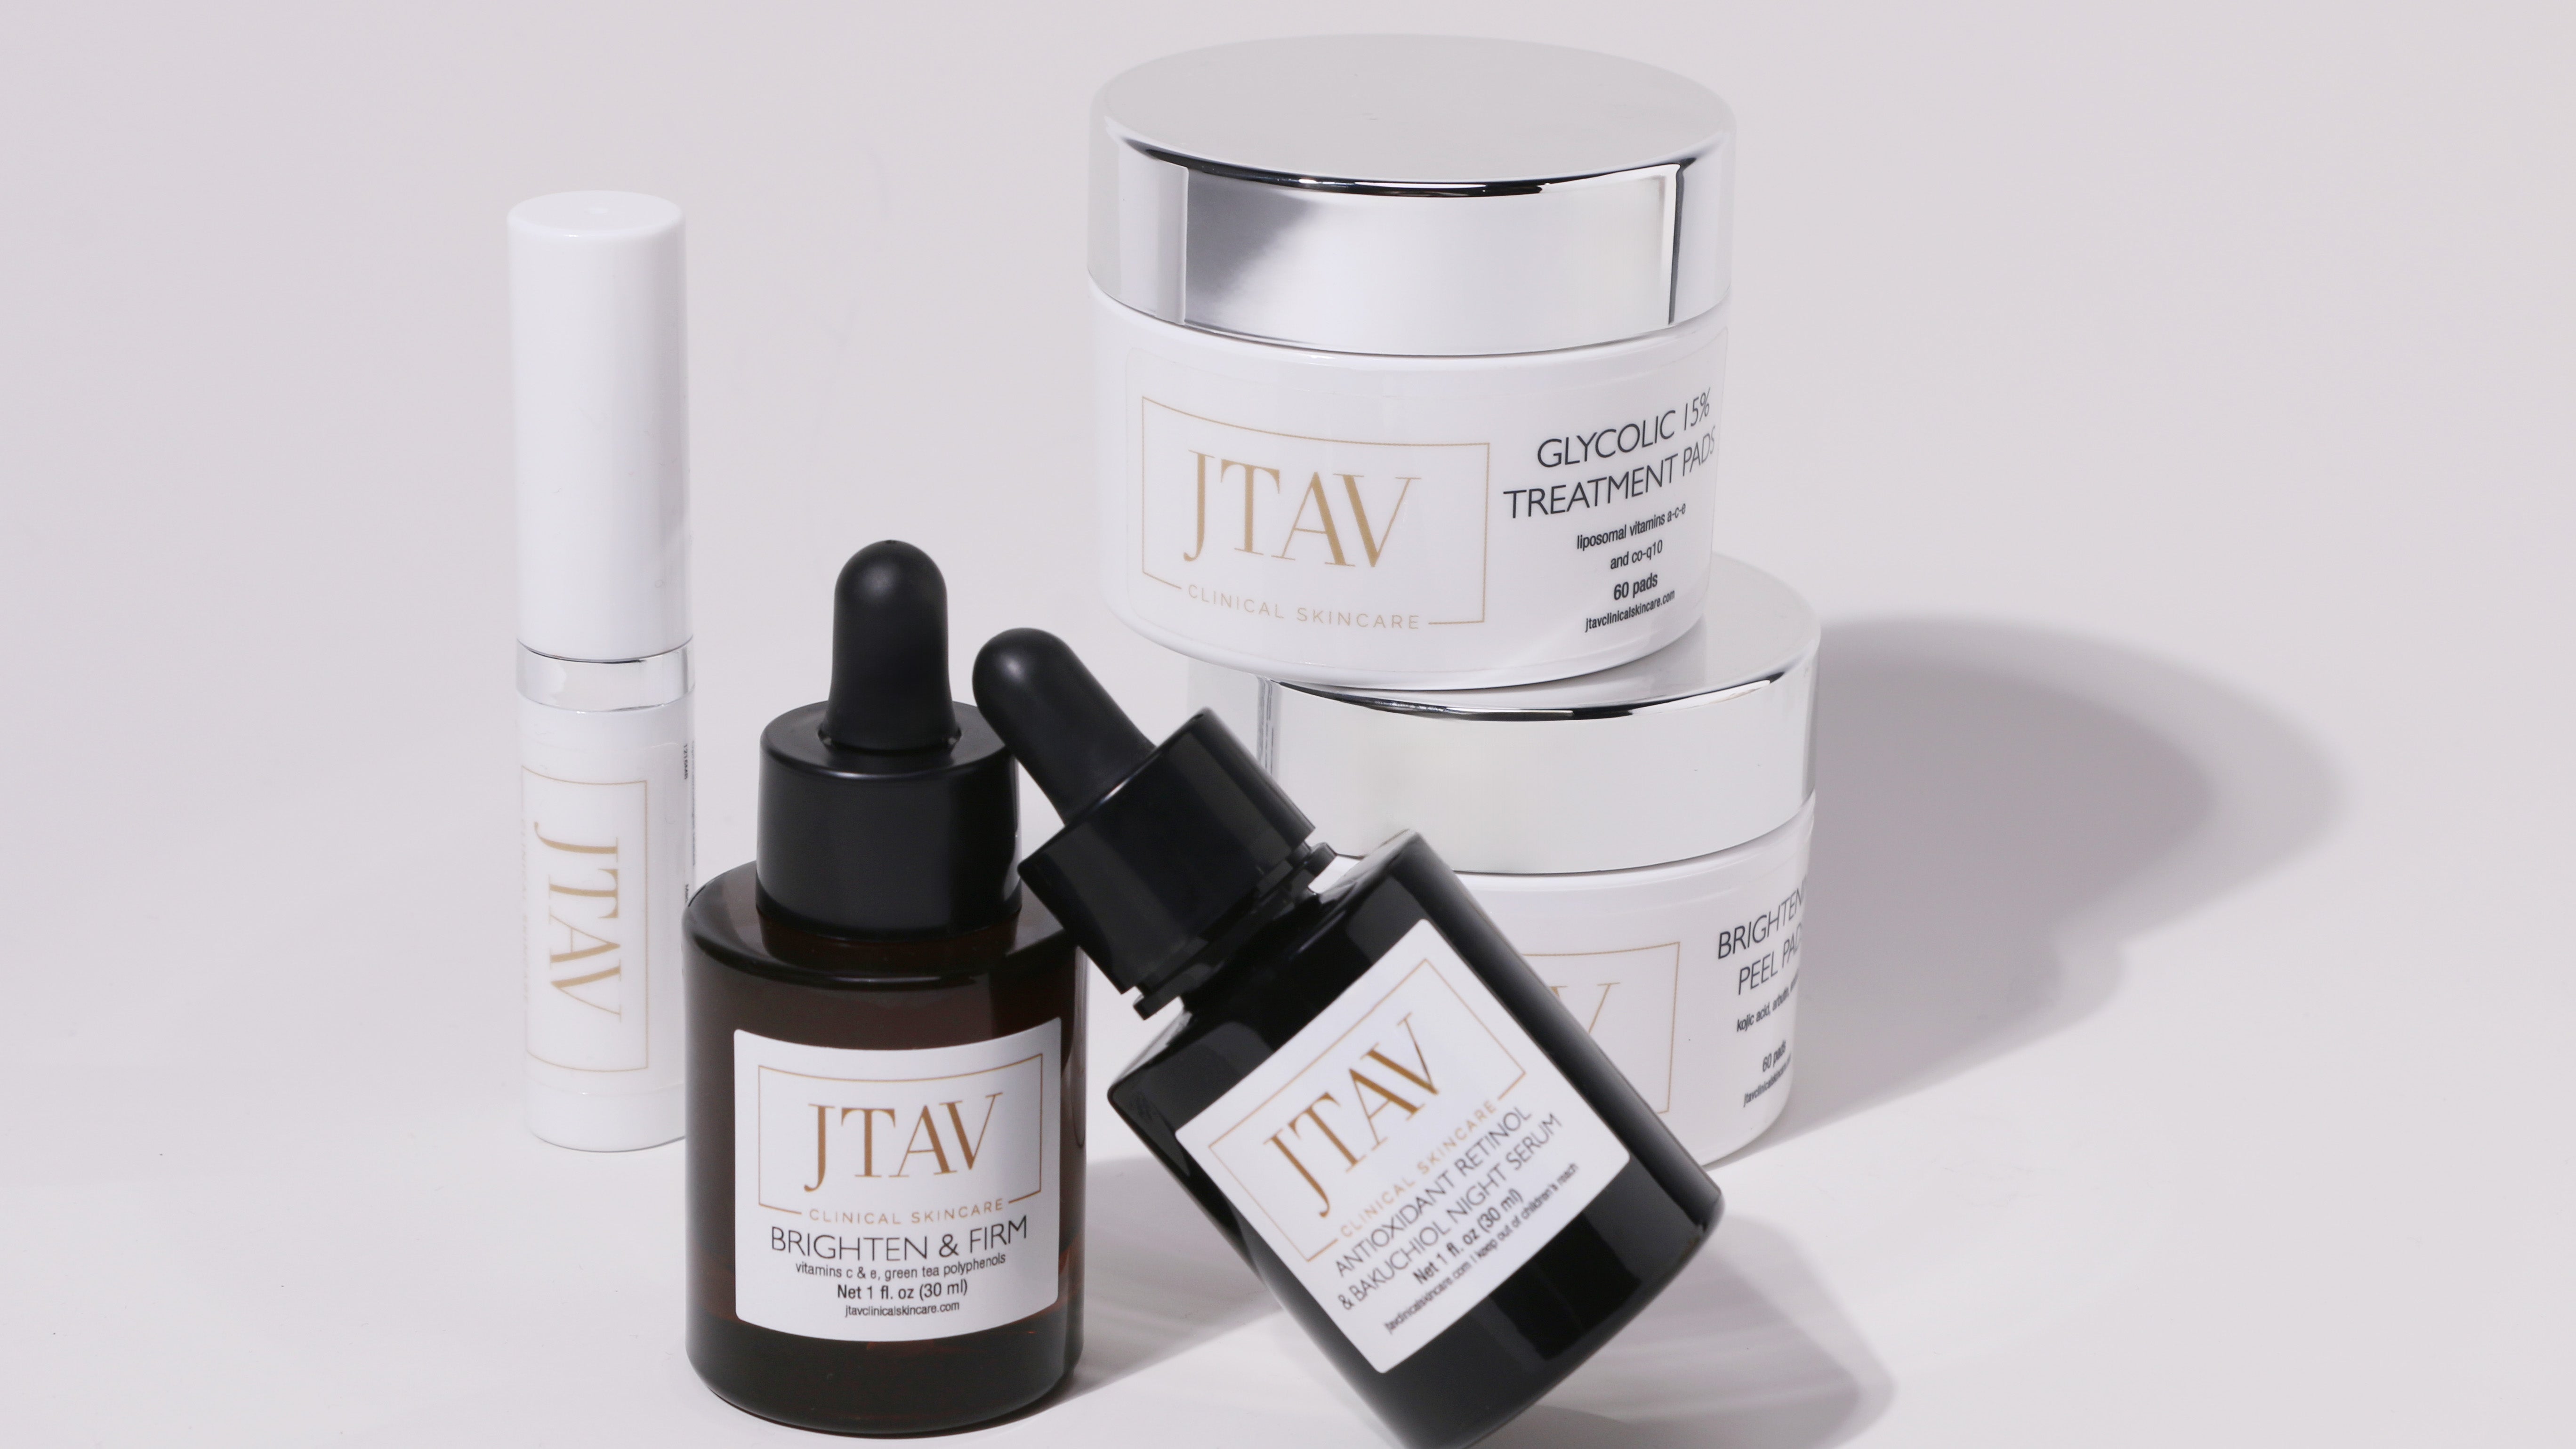 Your Must-have JTAV Clinical Skincare Products For March